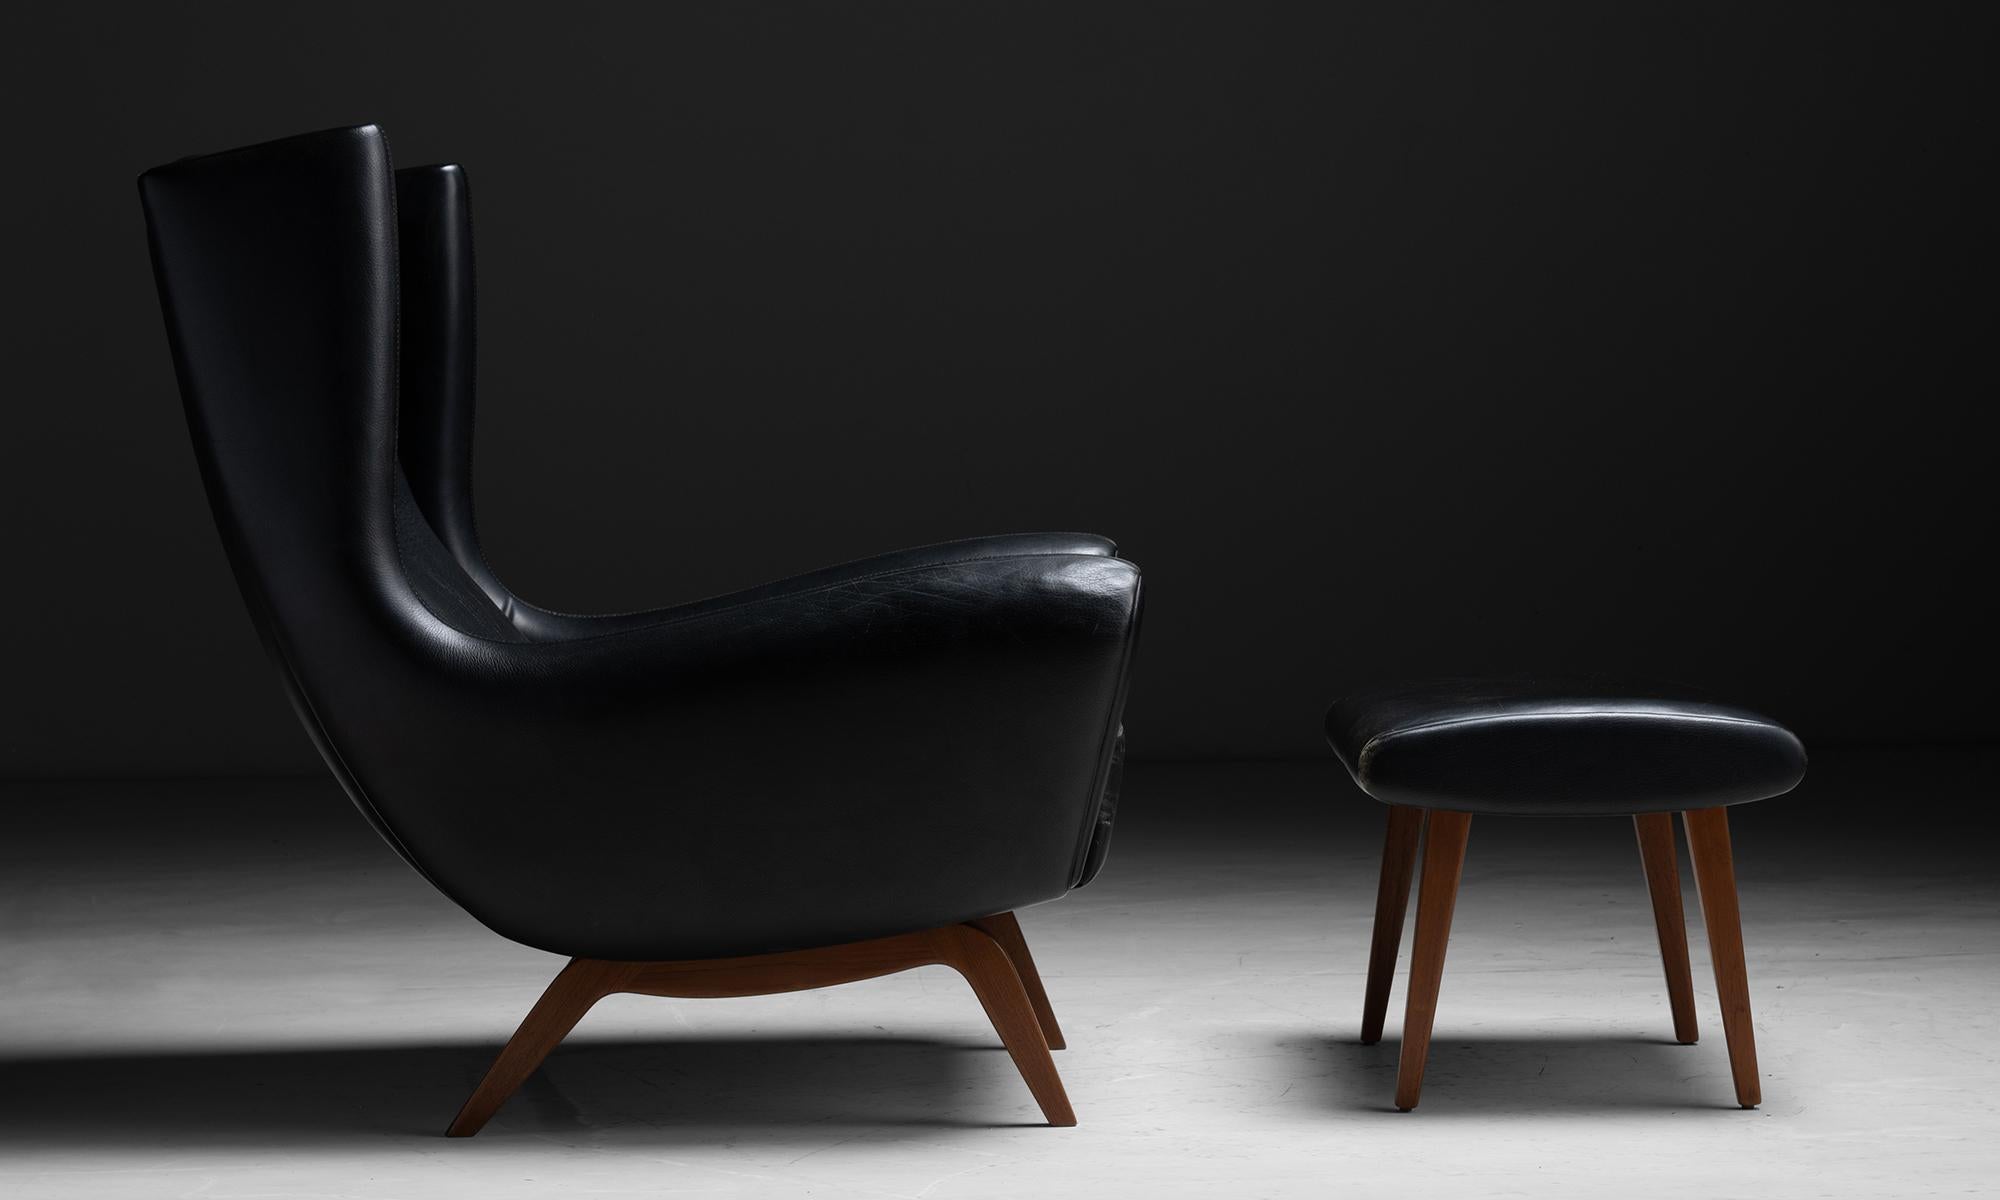 Danish Leather Lounge Chair & Ottoman by Illum Wikkelso, Denmark circa 1955